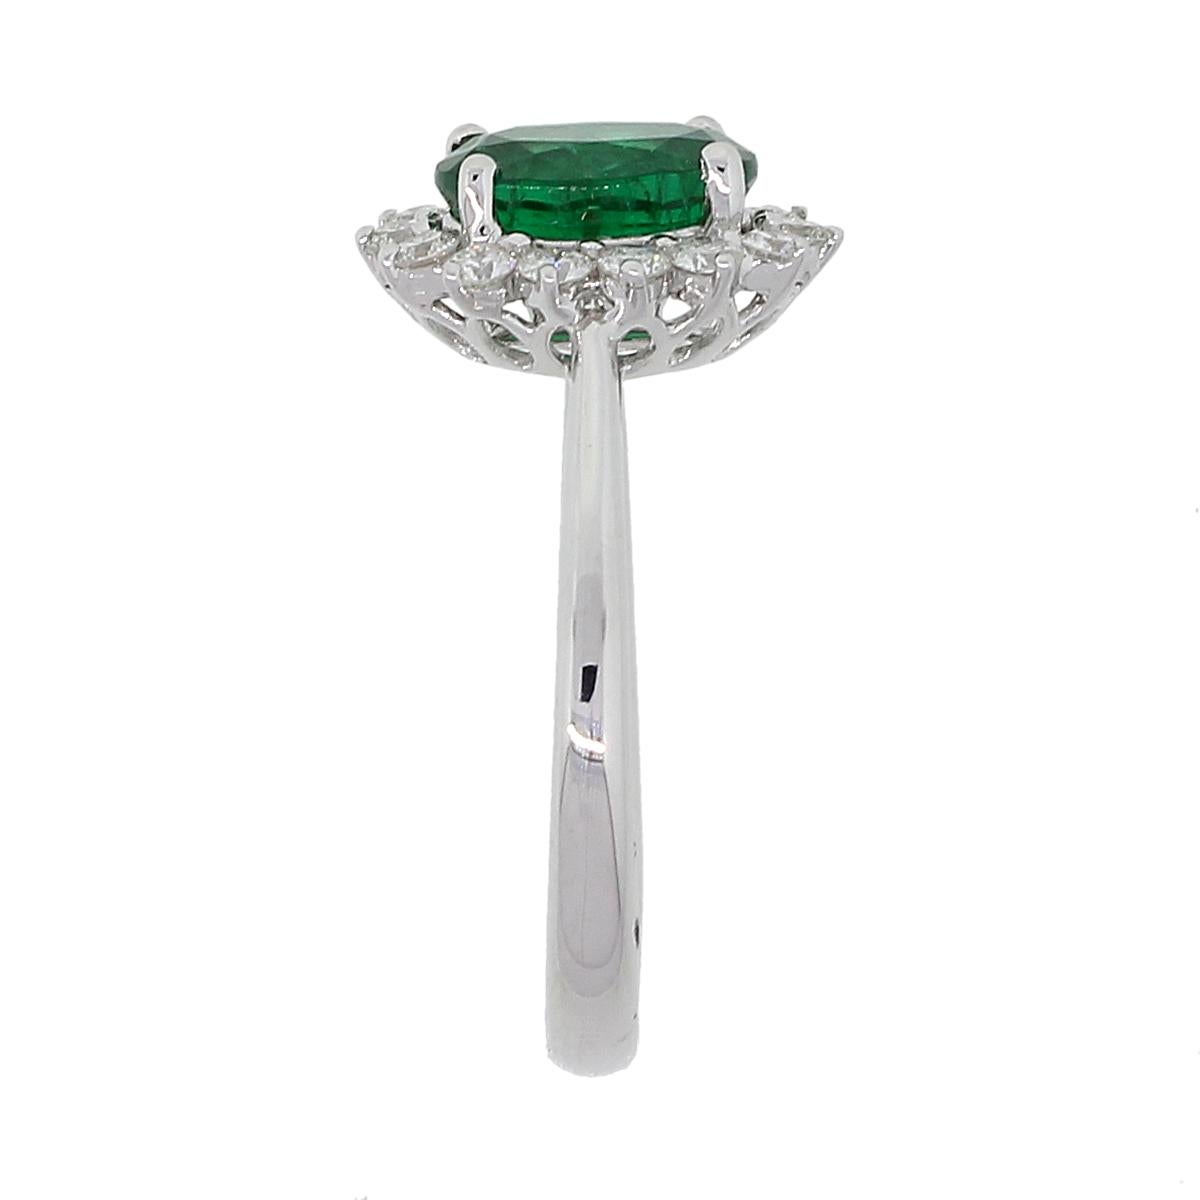 Material: 18k white gold
Gemstone Details: Approximately 1.30ct oval shape emerald.
Diamond Details: Approximately 0.34ctw of round brilliant diamonds. Diamonds are G/H in color and VS in clarity
Size: 6.25
Total Weight: 3.1g (2dwt)
Measurements: